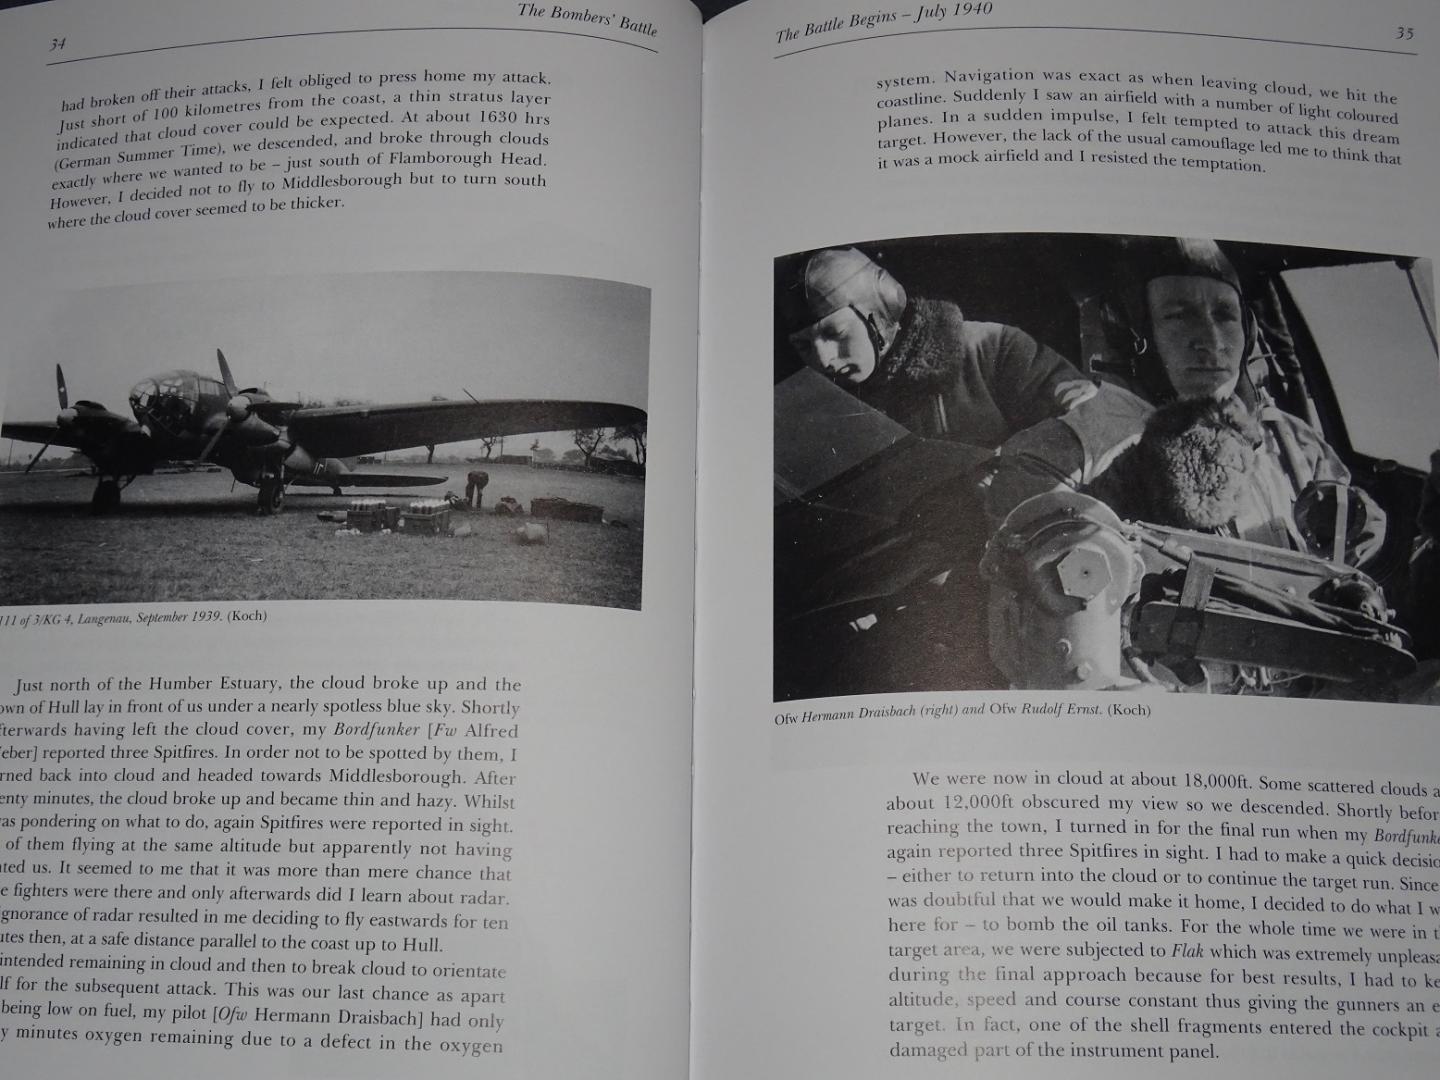 Goss, Chris - The Luftwaffe Bombers' Battle of Britain - the inside story : July - October 1940